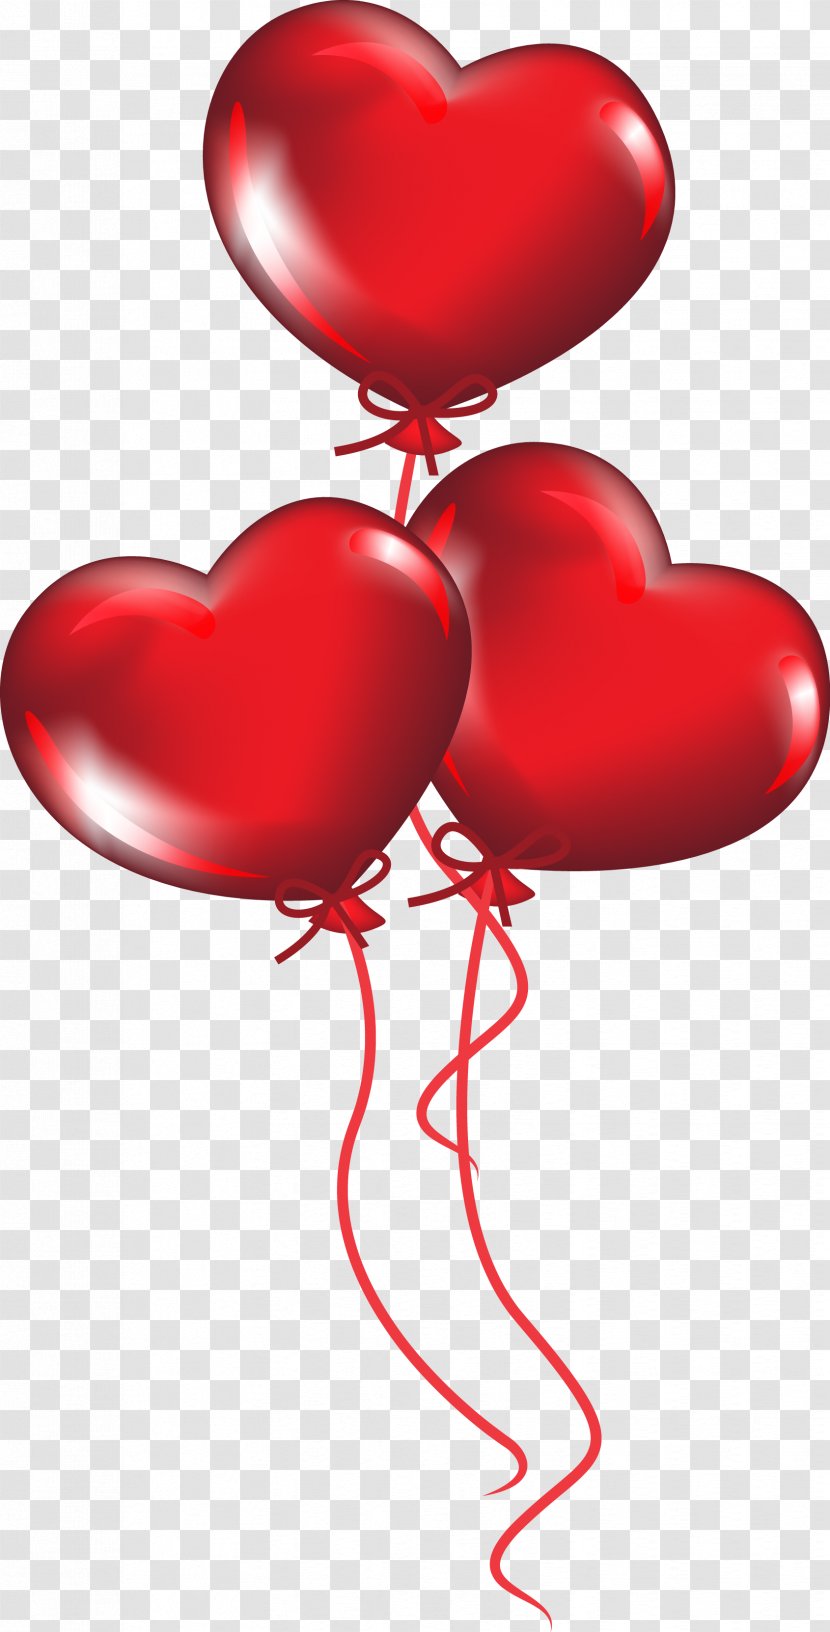 Heart-shaped Balloons Vector Material - Flower - Tree Transparent PNG